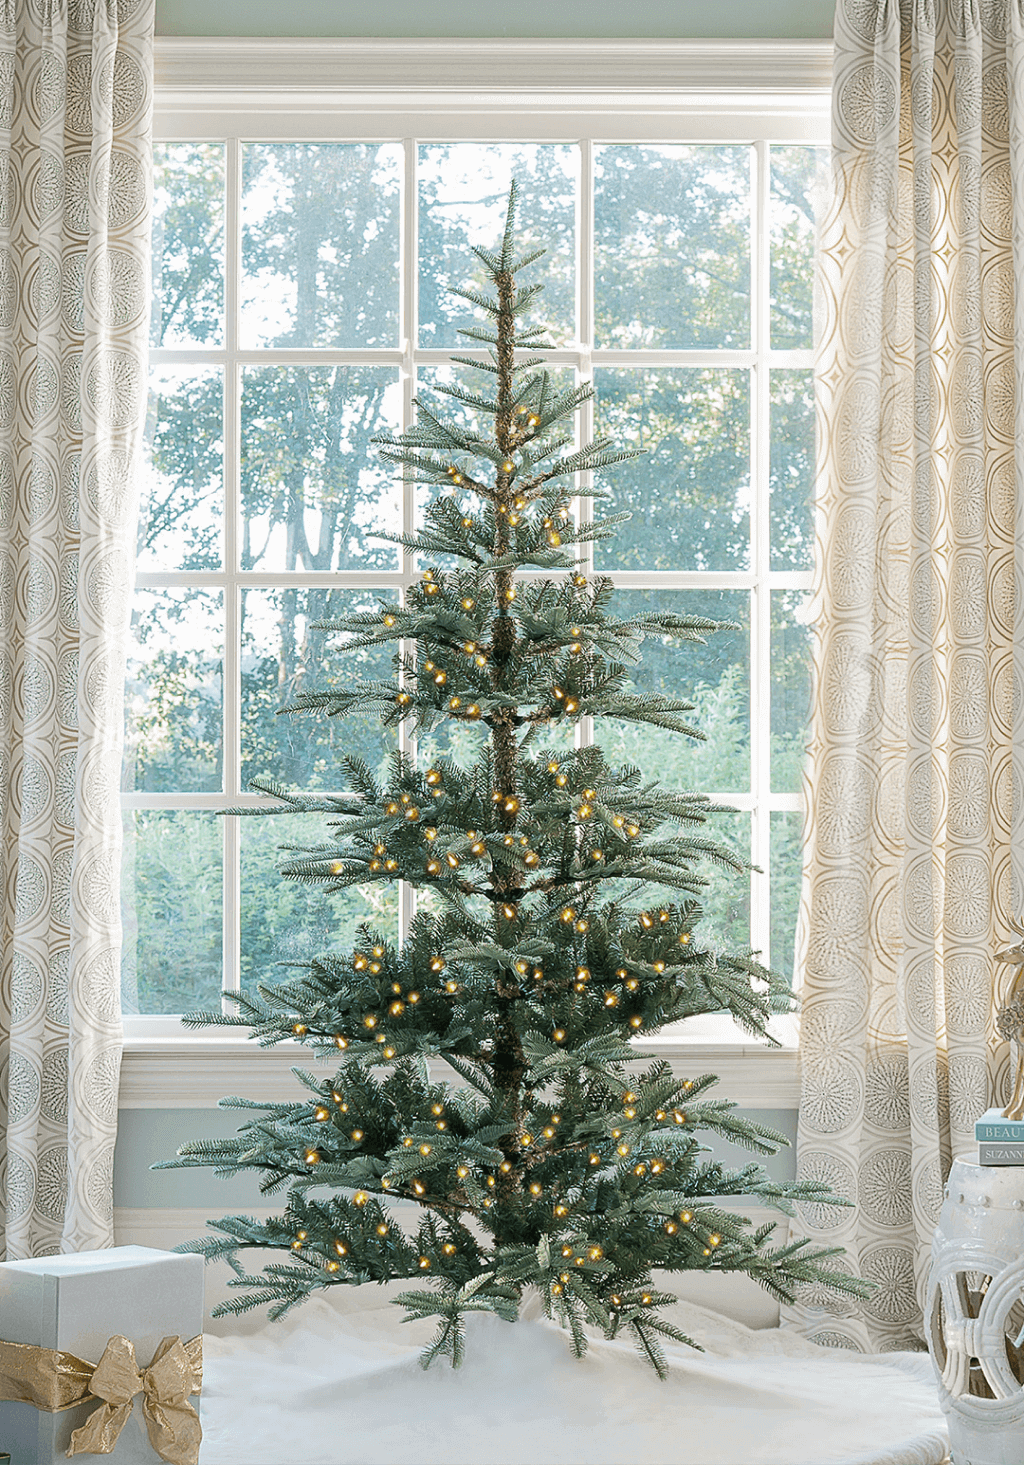 King of Christmas 7 ft King Noble Fir Artificial Christmas Tree with 500 Warm White LED Lights